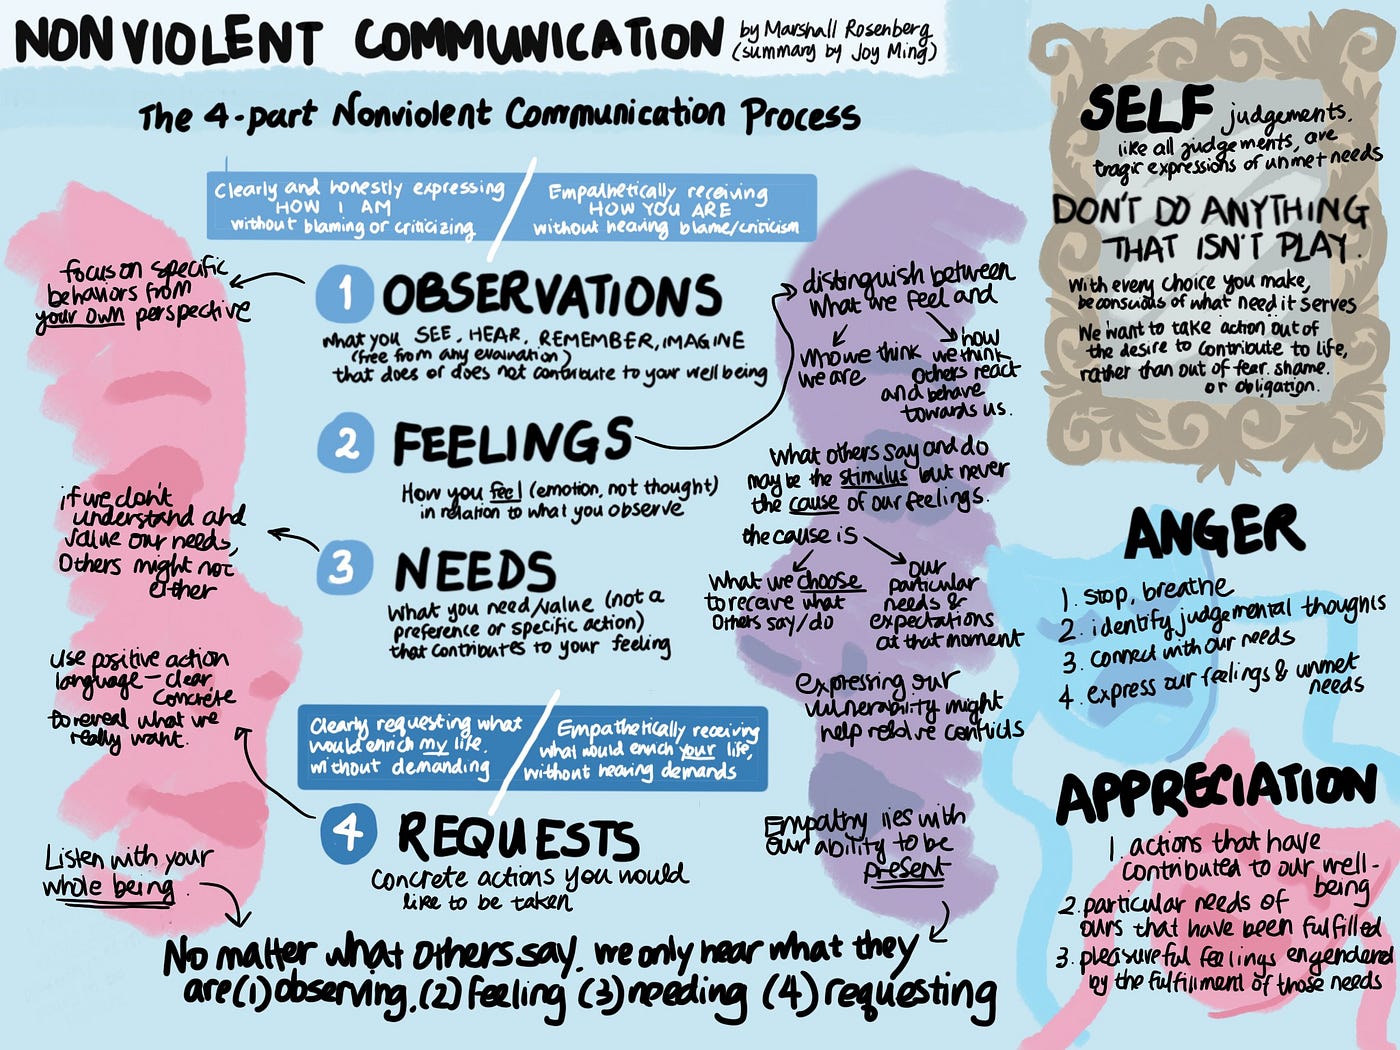 Visual summary of 4-part nonviolent communication process. Please refer to the linked blogpost for a full transcription of the text in the image.